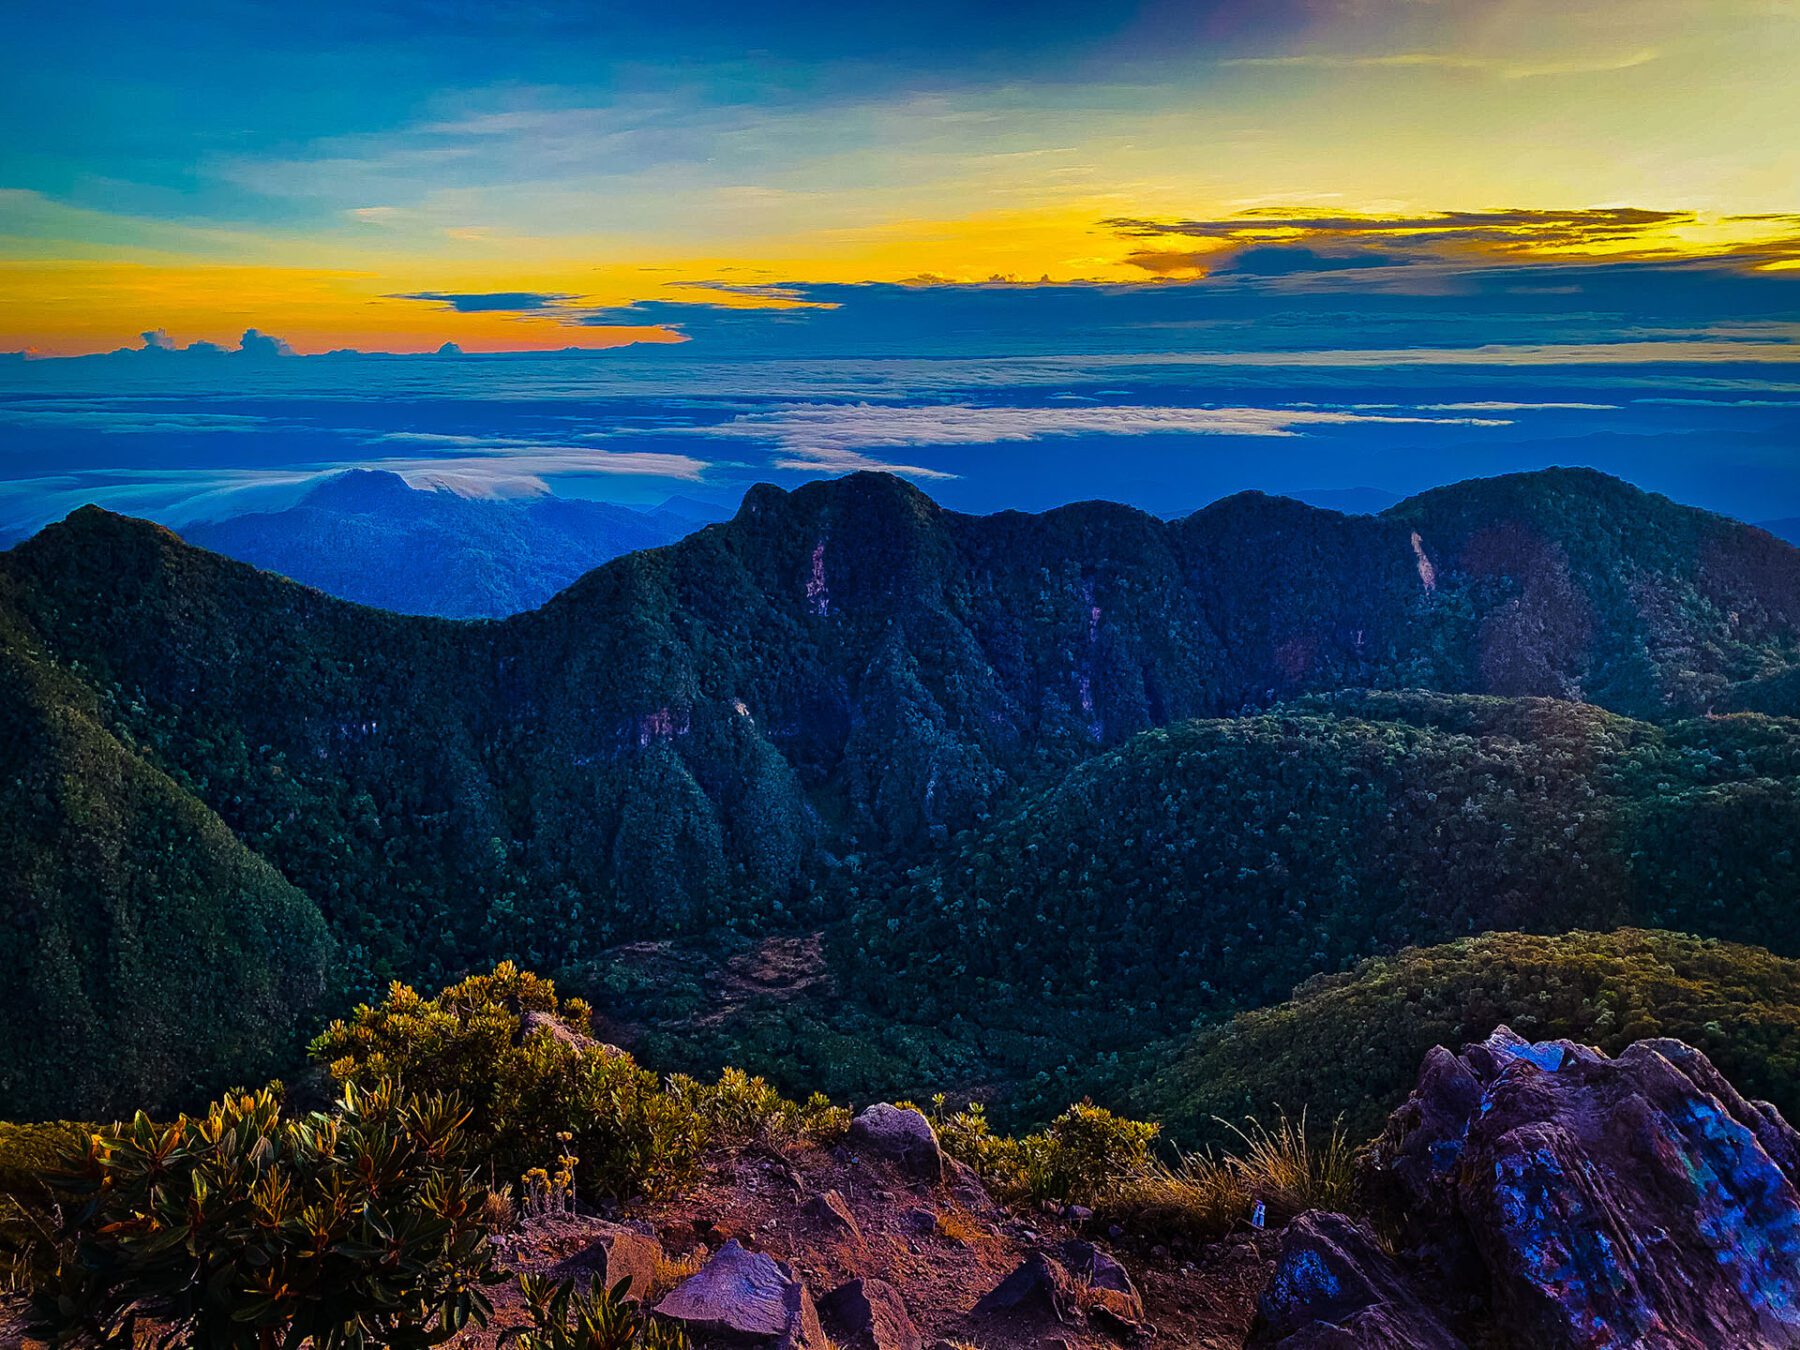 A view of the Panama mountains at sunset.